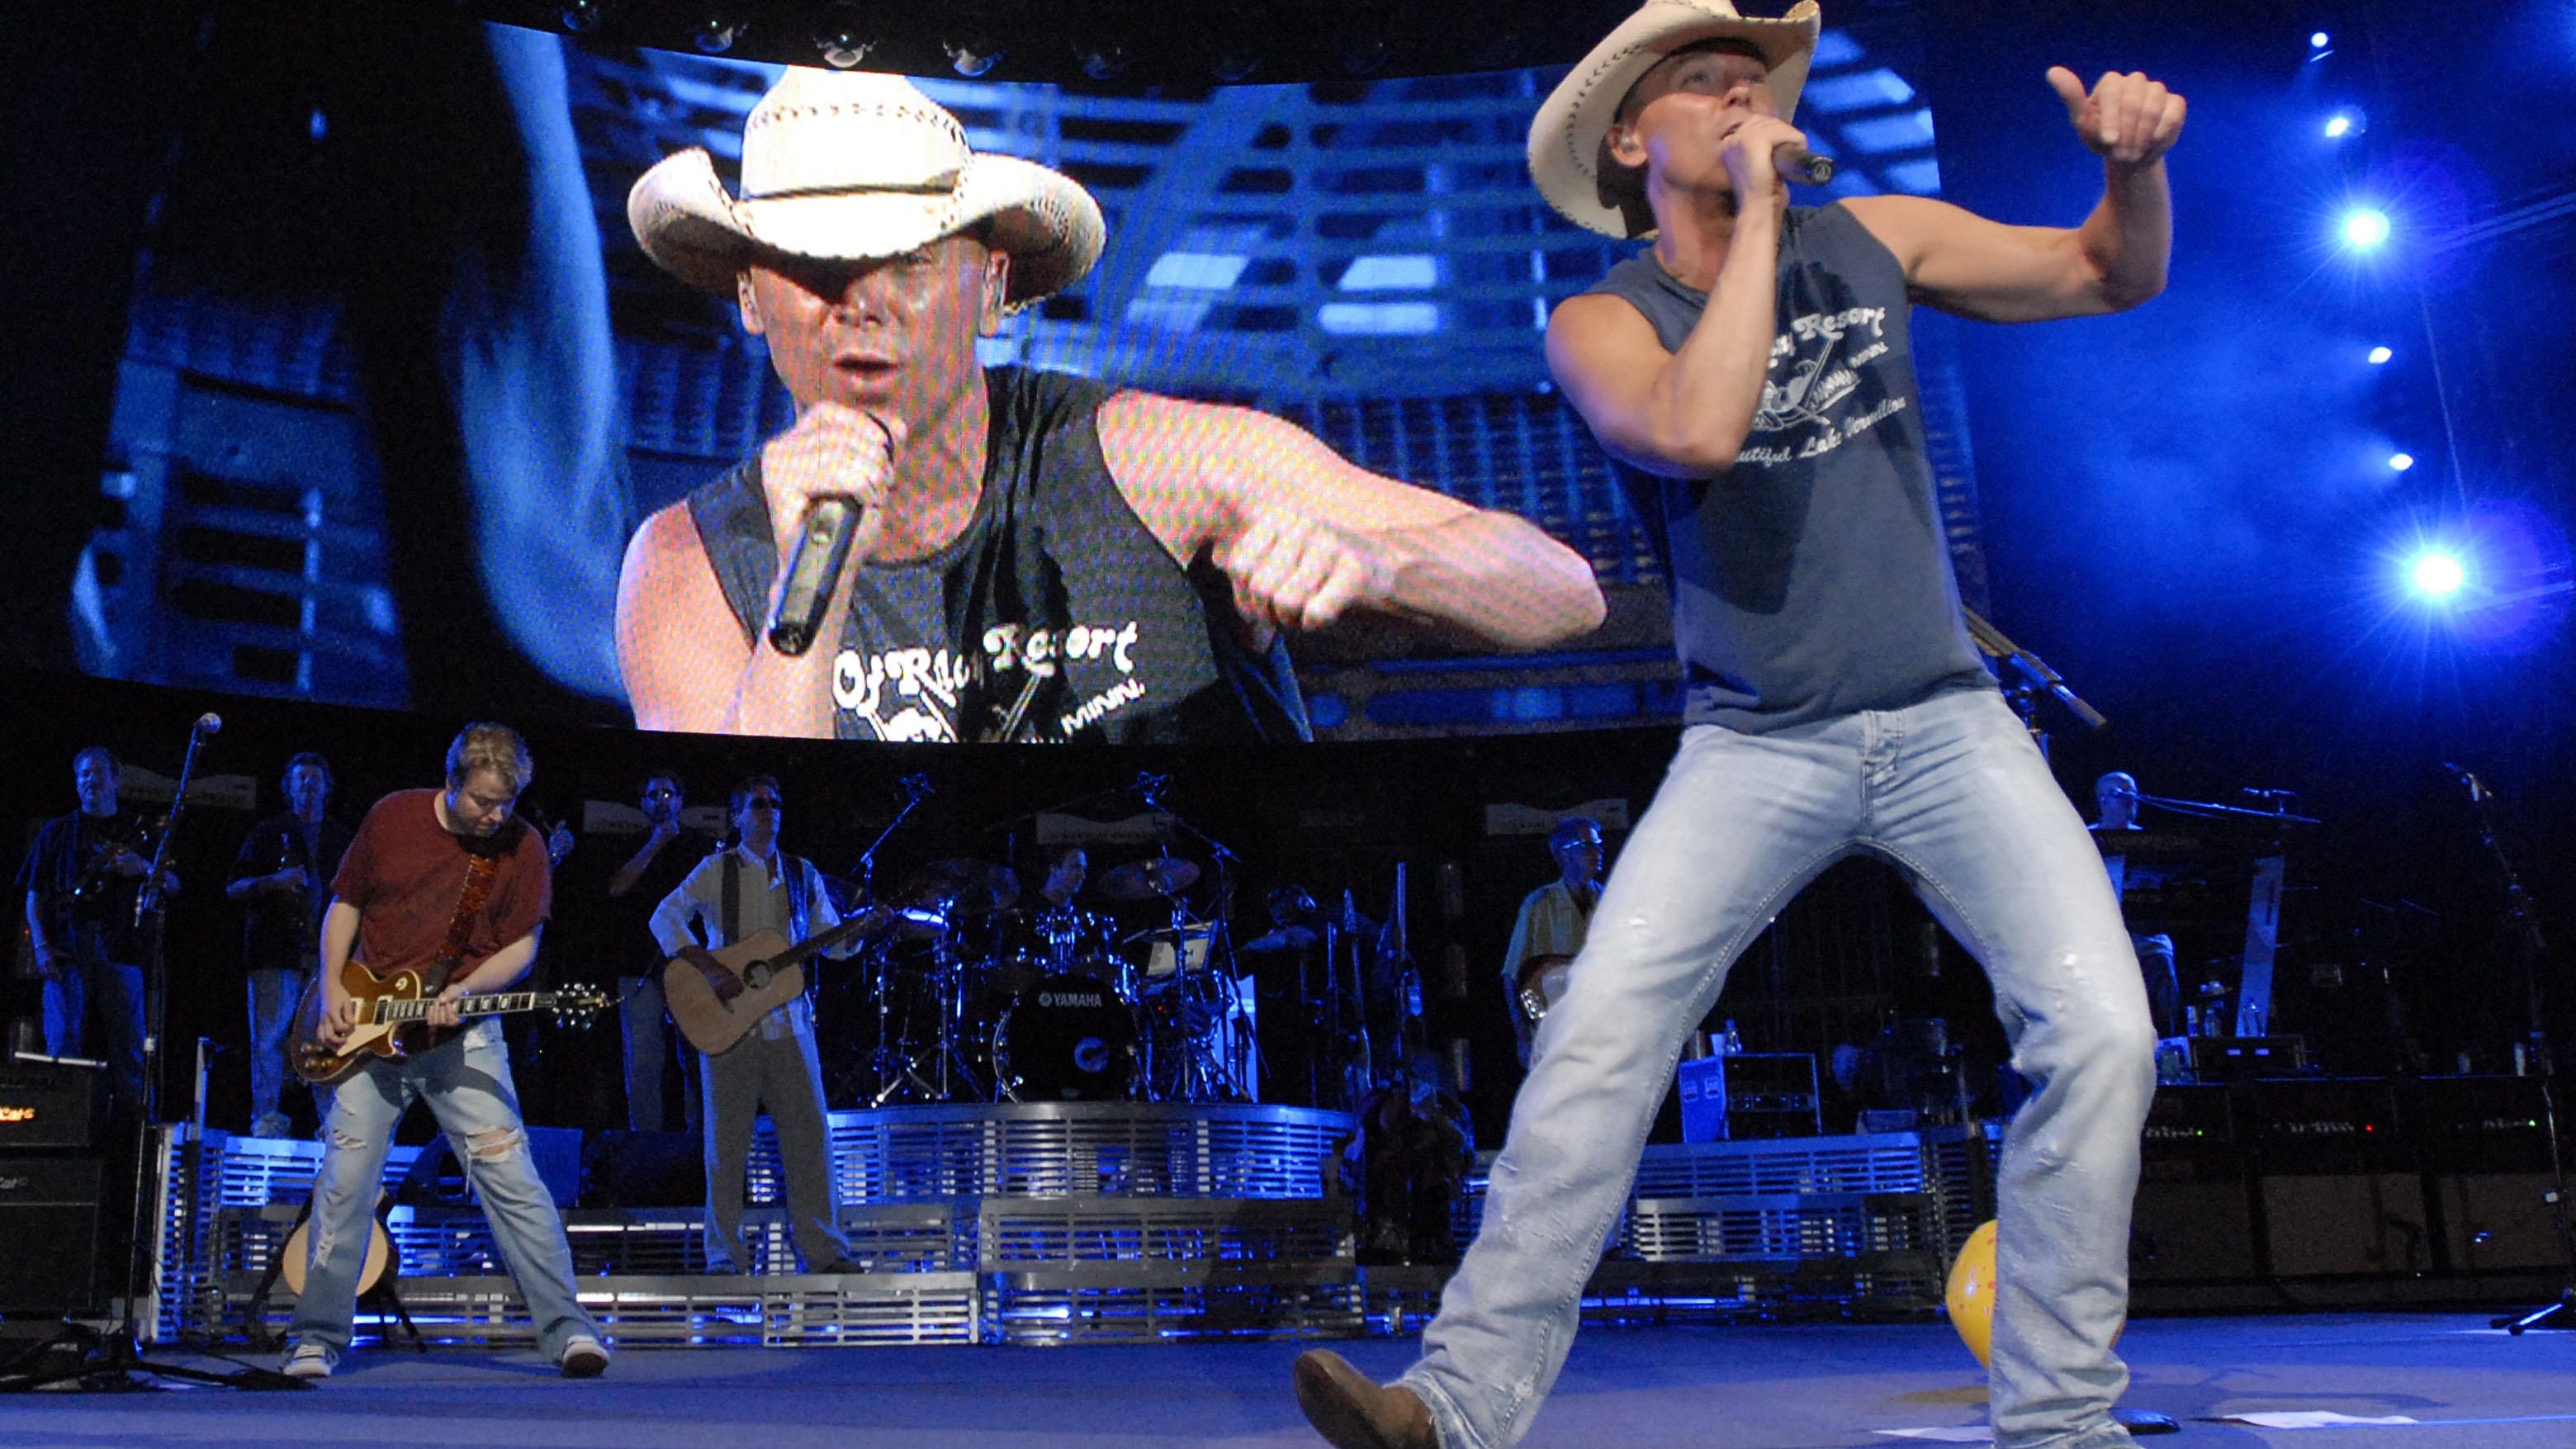 CMAC summer concerts include shows by Kenny Chesney, Ringo Starr